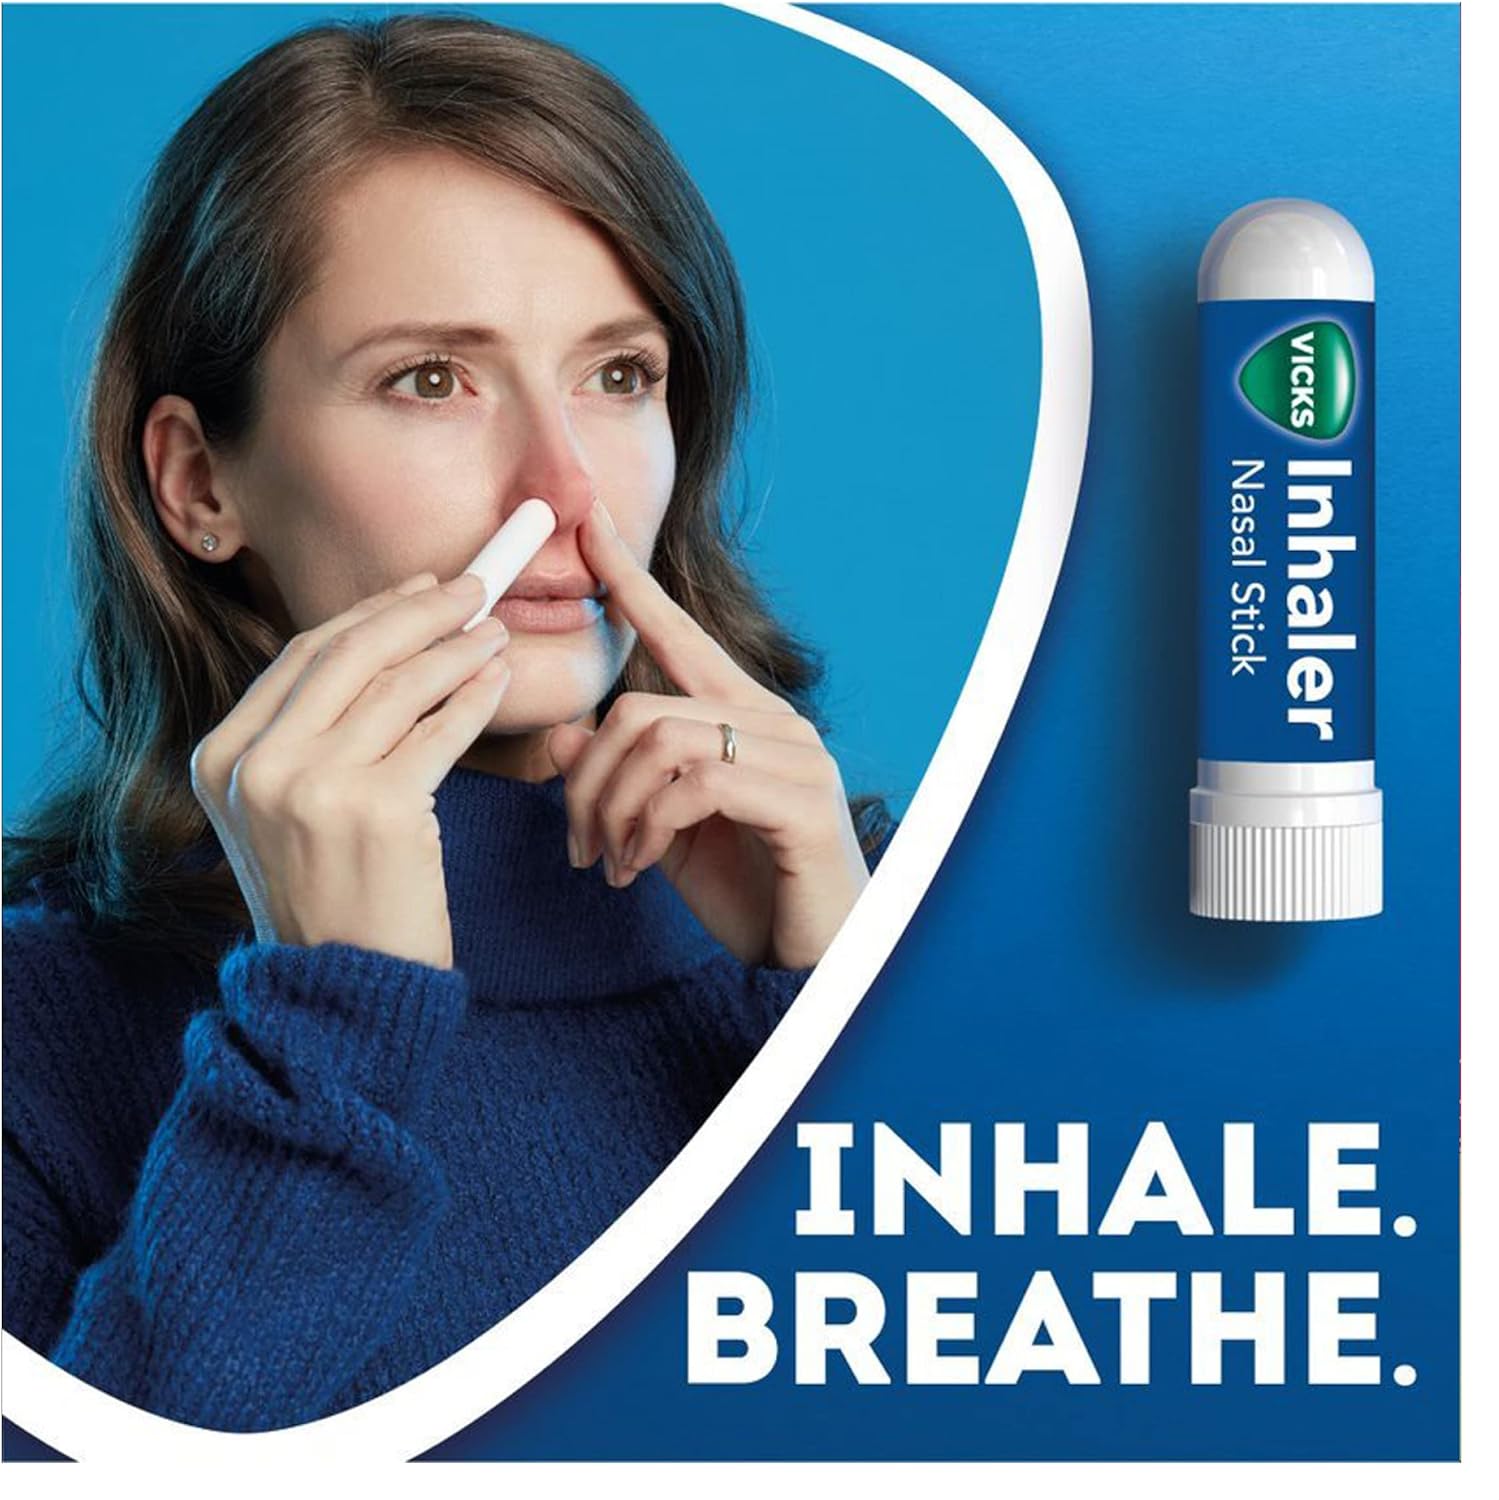 Vicks Inhaler For Cold And Cough, Fast Relief From A Stuffy Nose, Decongestant For Blocked Nose